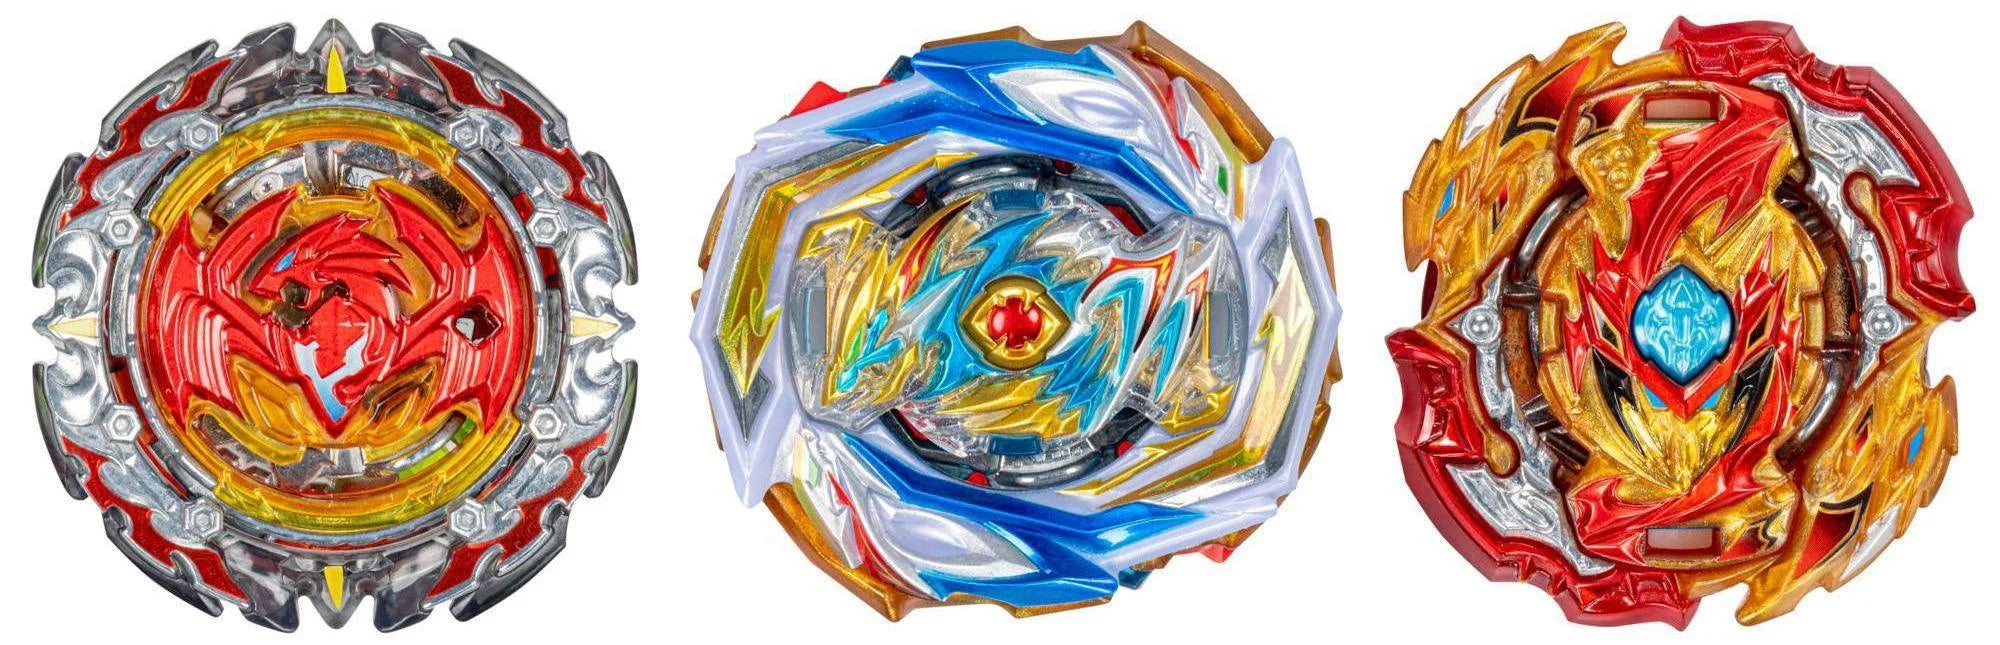 collection of beyblade burst pro series Mythic beast 